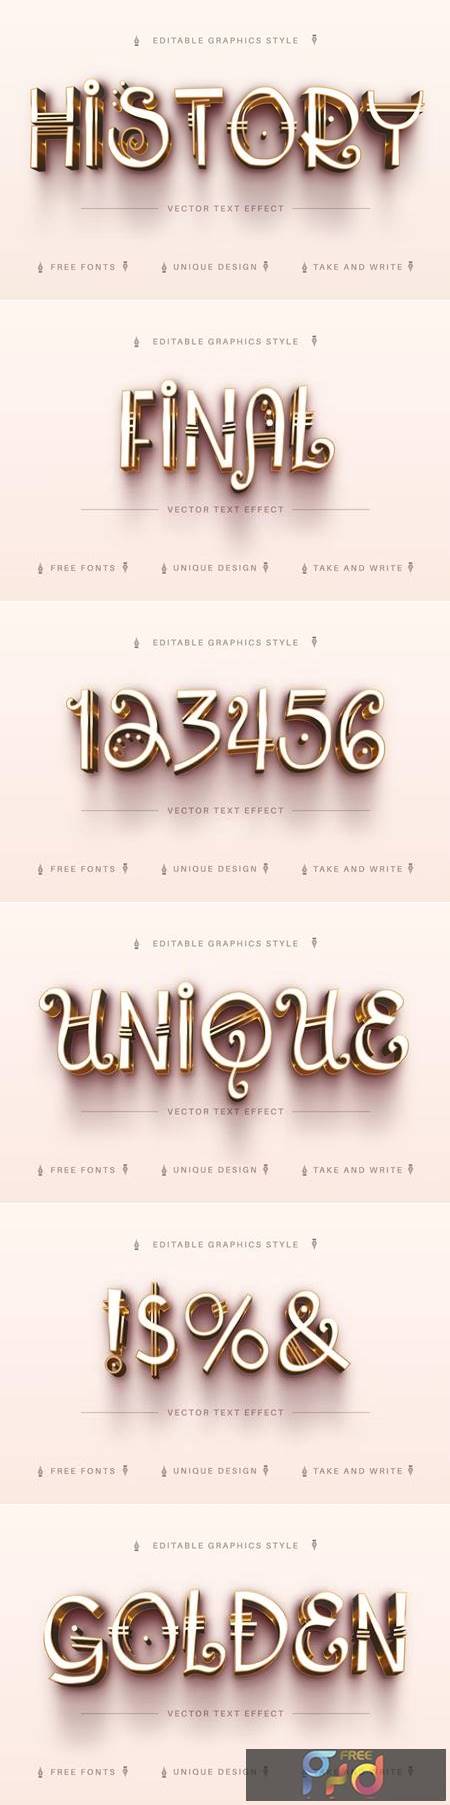 Golden History - Editable Text Effect, Font Style 9S8PGWP 1